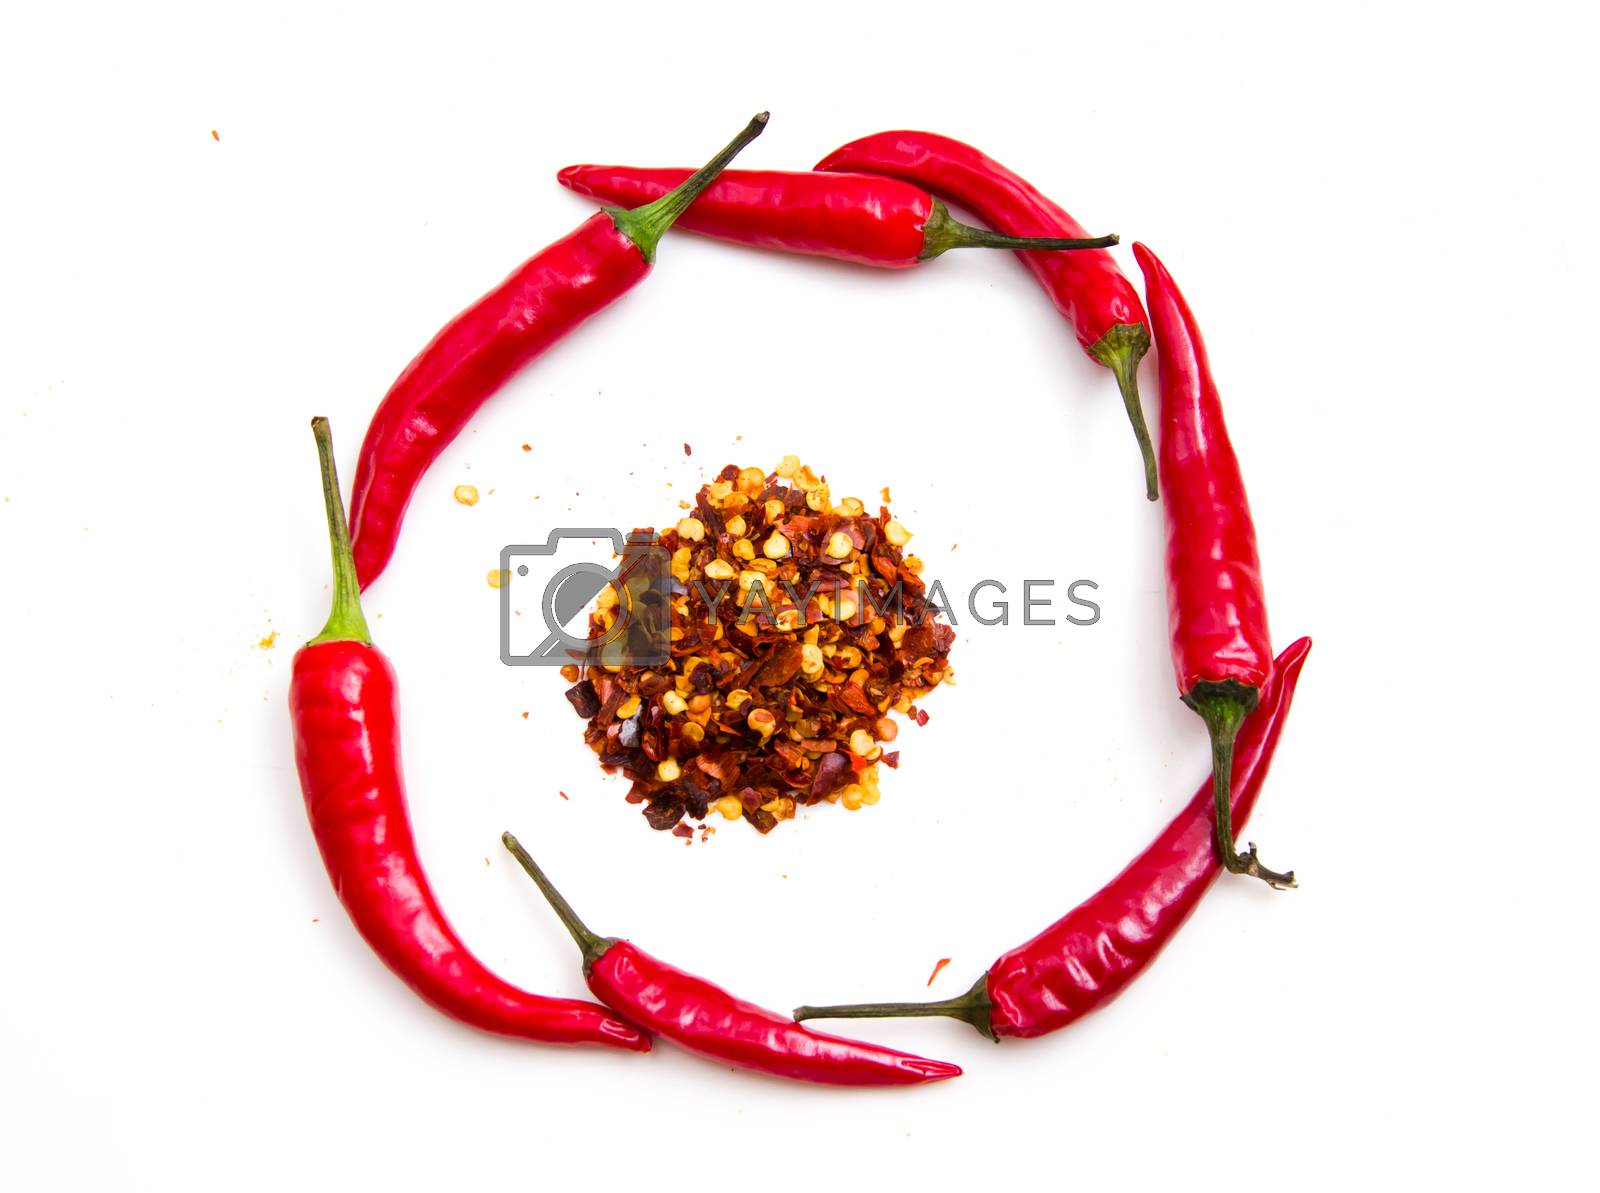 Royalty free image of Hot peppers around spices by spafra